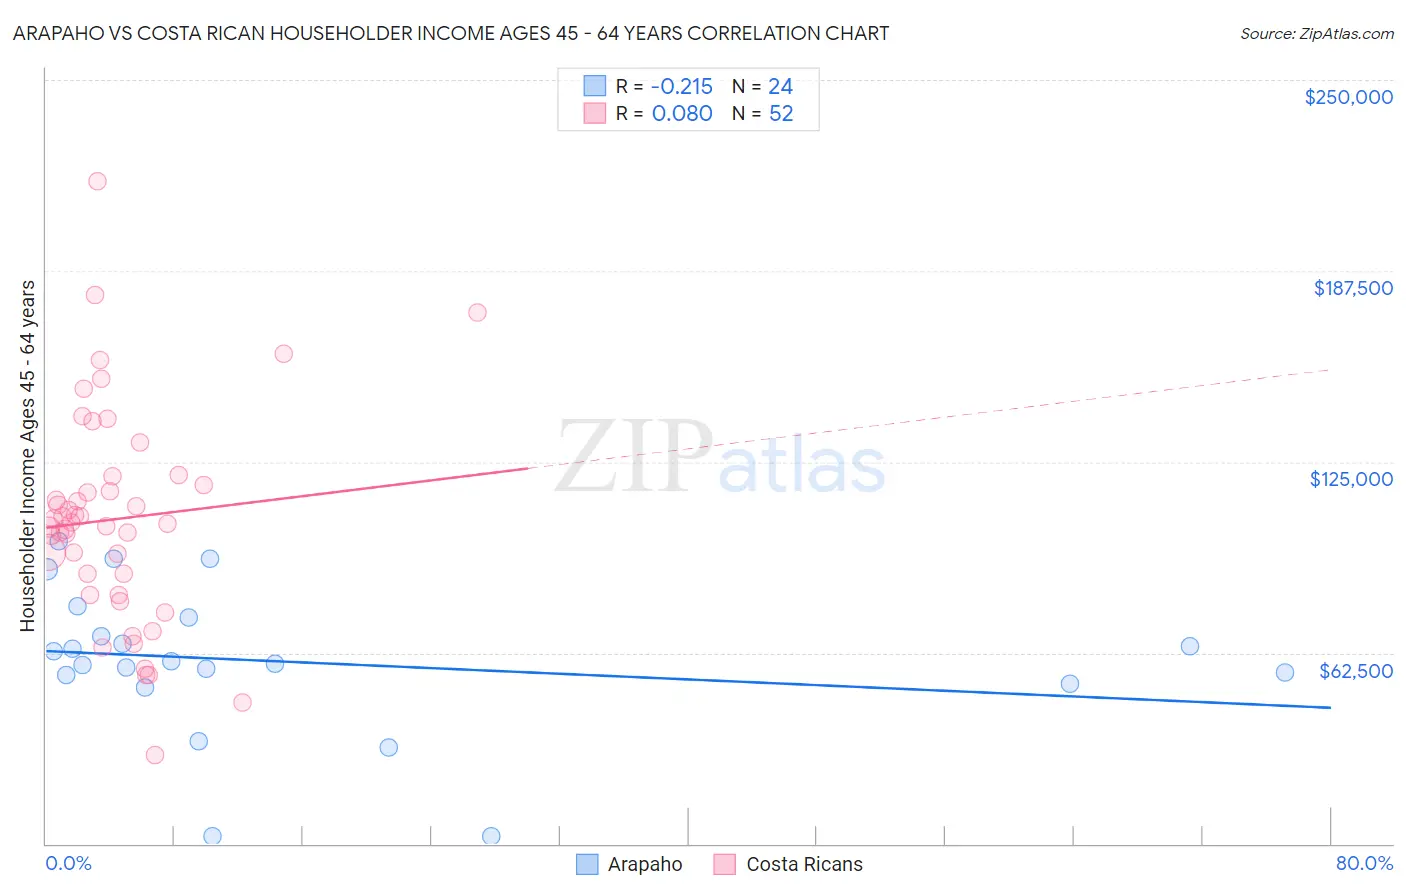 Arapaho vs Costa Rican Householder Income Ages 45 - 64 years